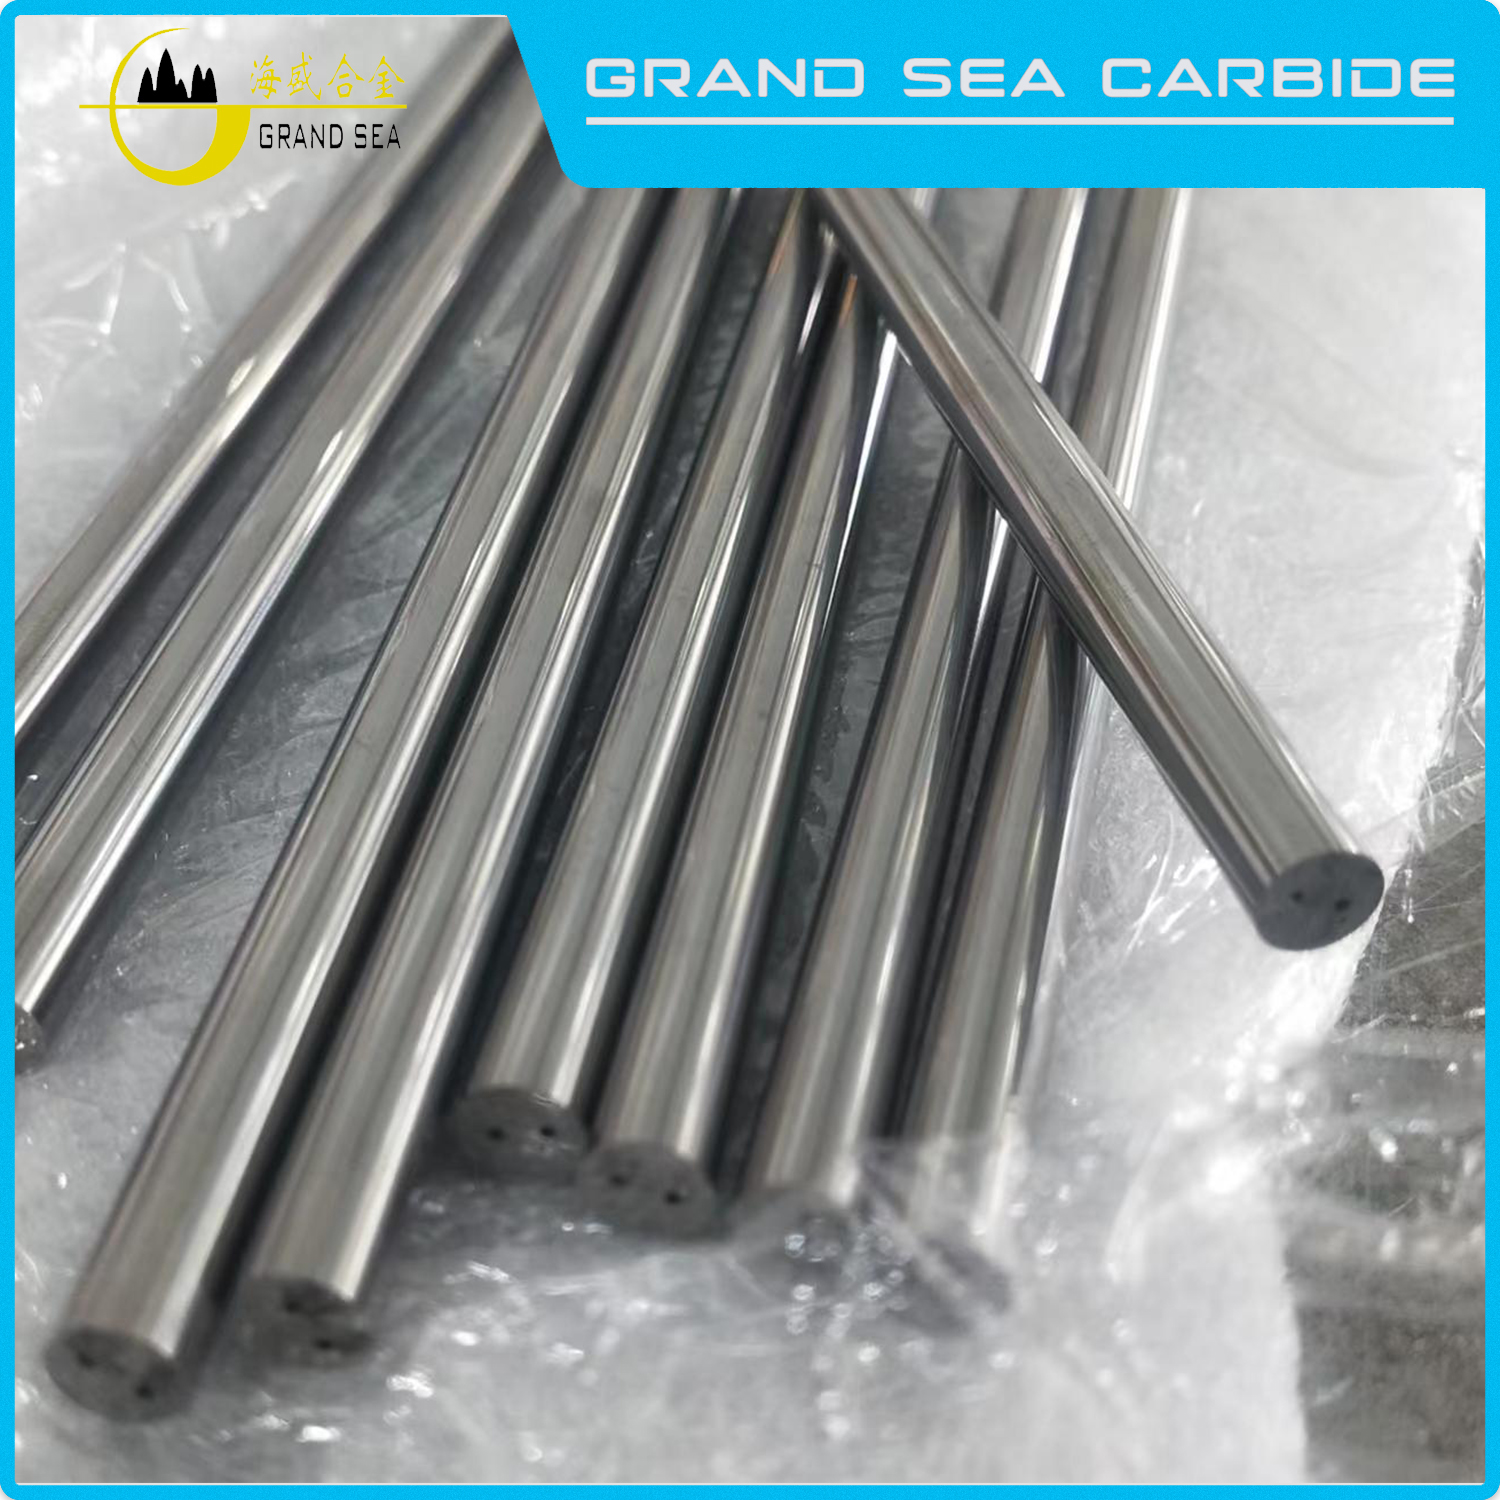 Tungtsen Carbide Grinded Rods with TWO Helical Coolant Holes